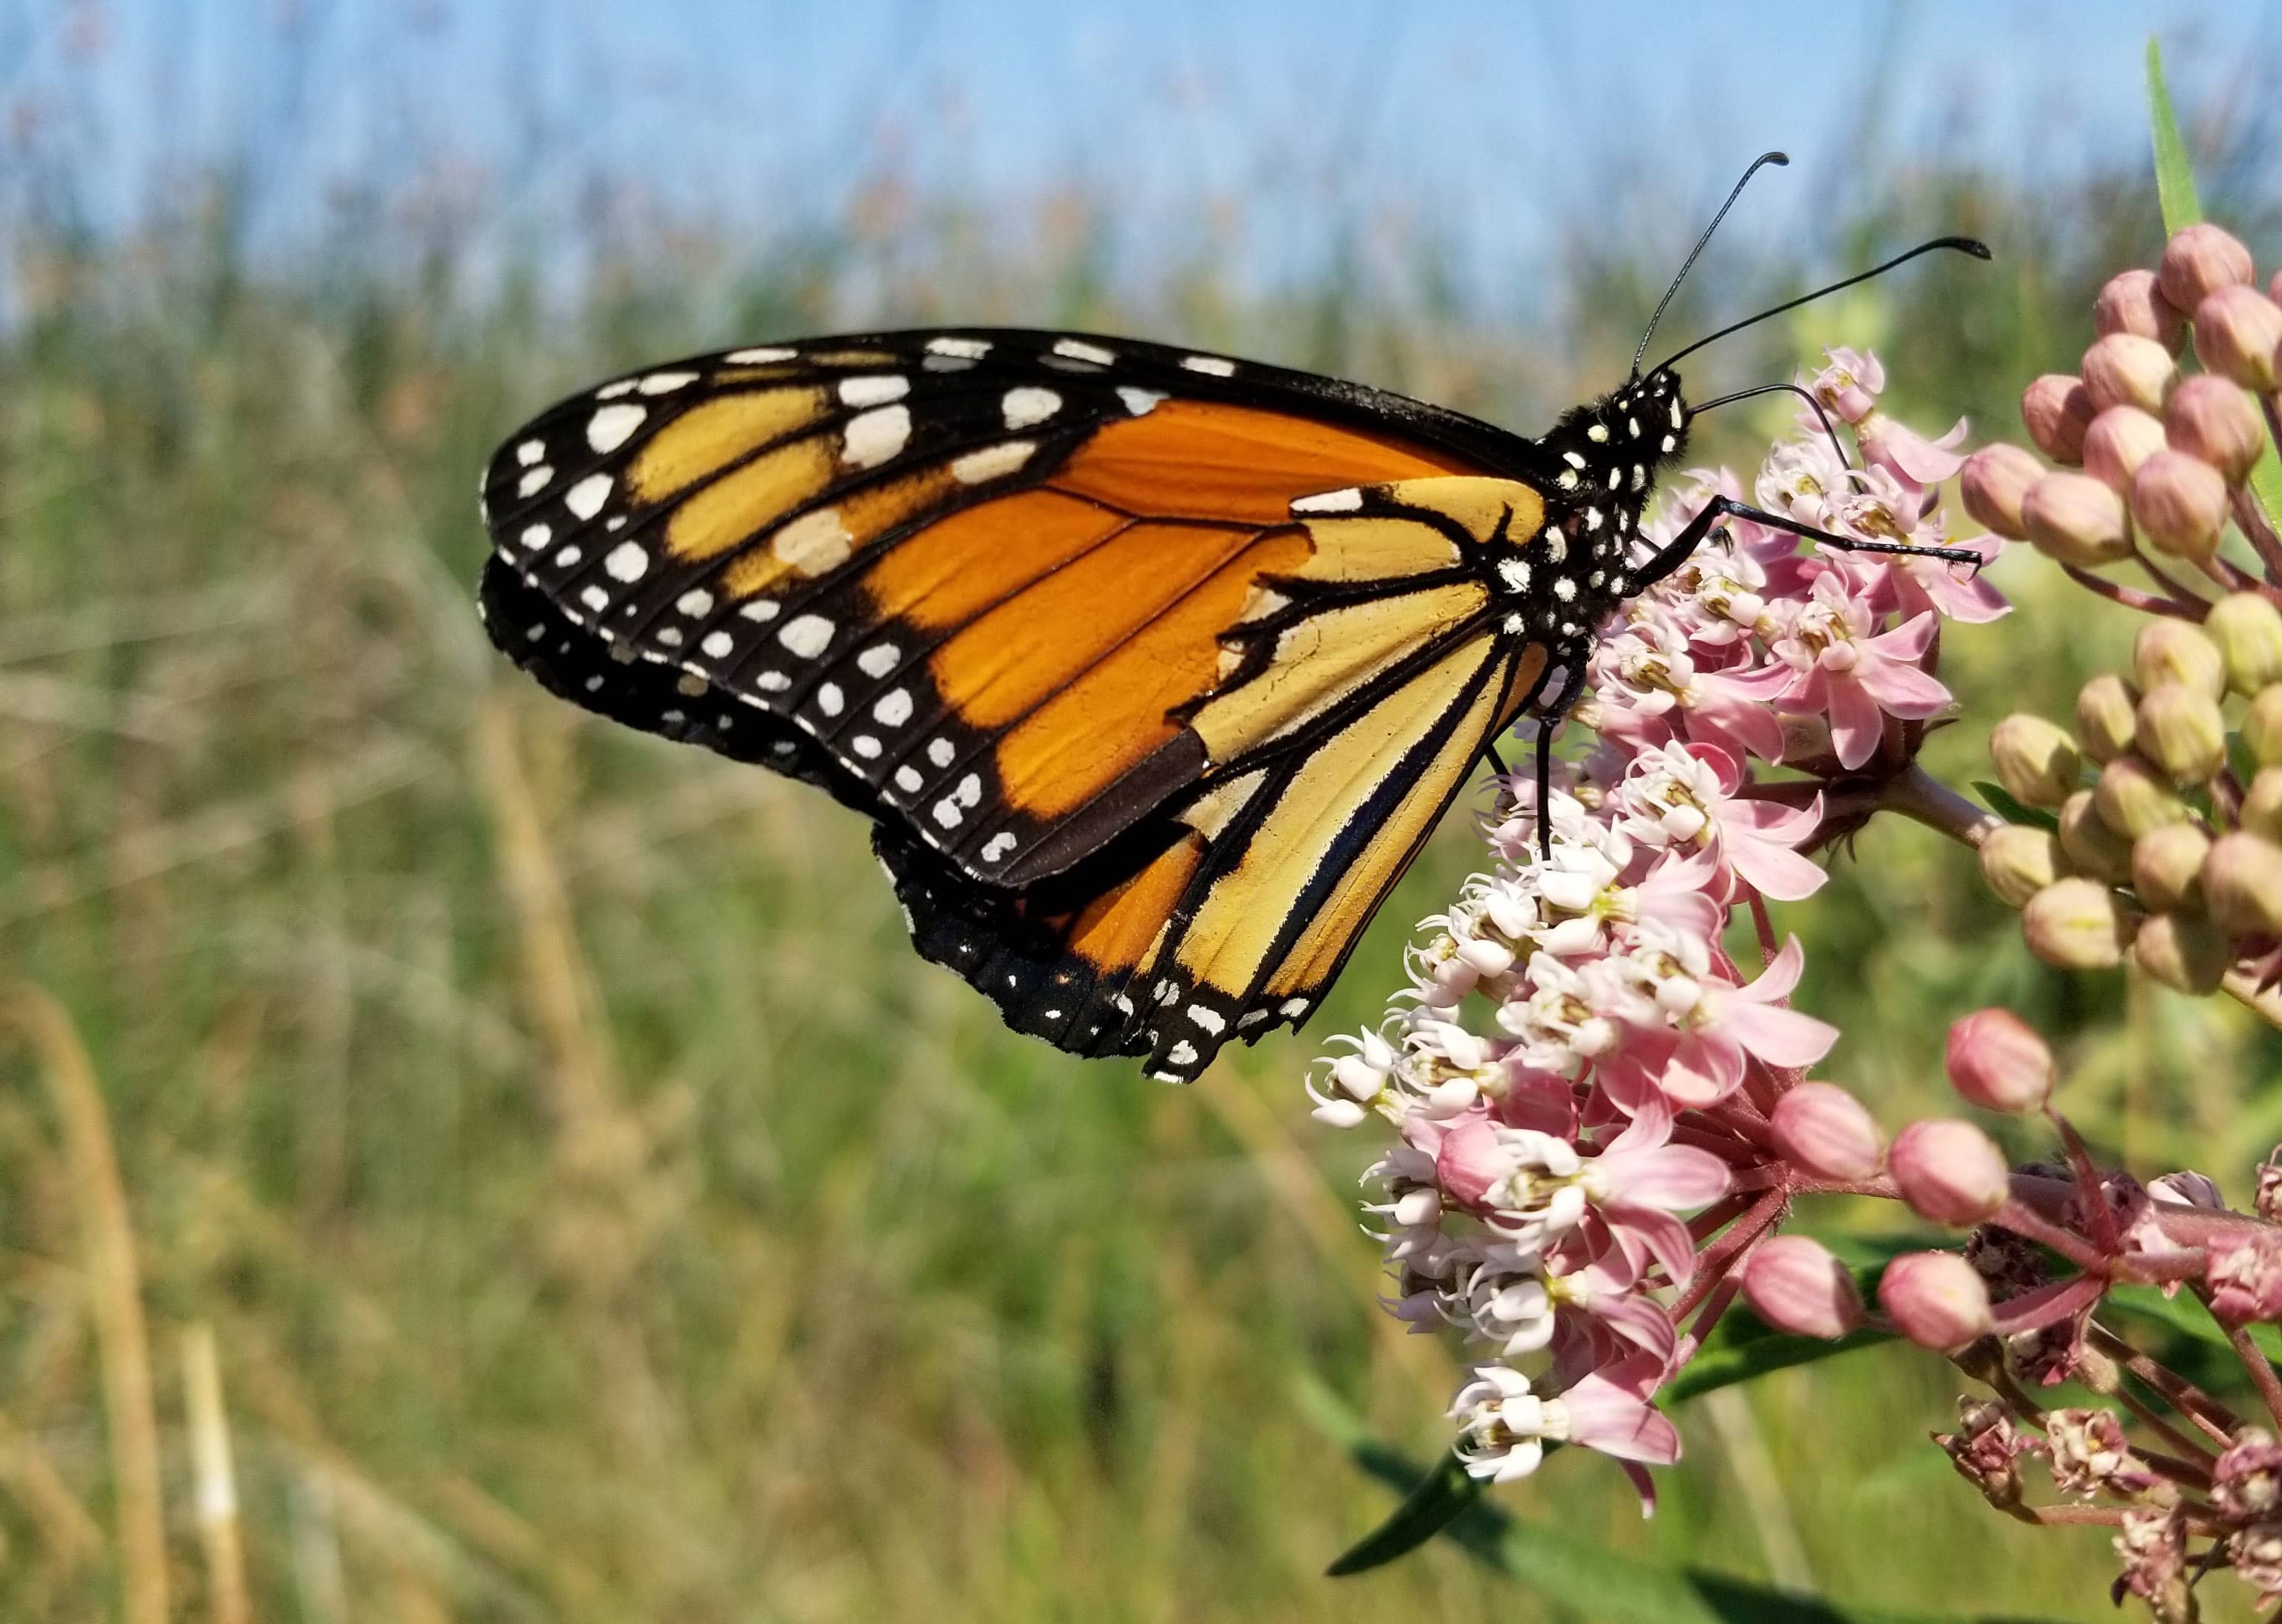 During the summer, monarchs were seen in lower densities than prior years in that state.